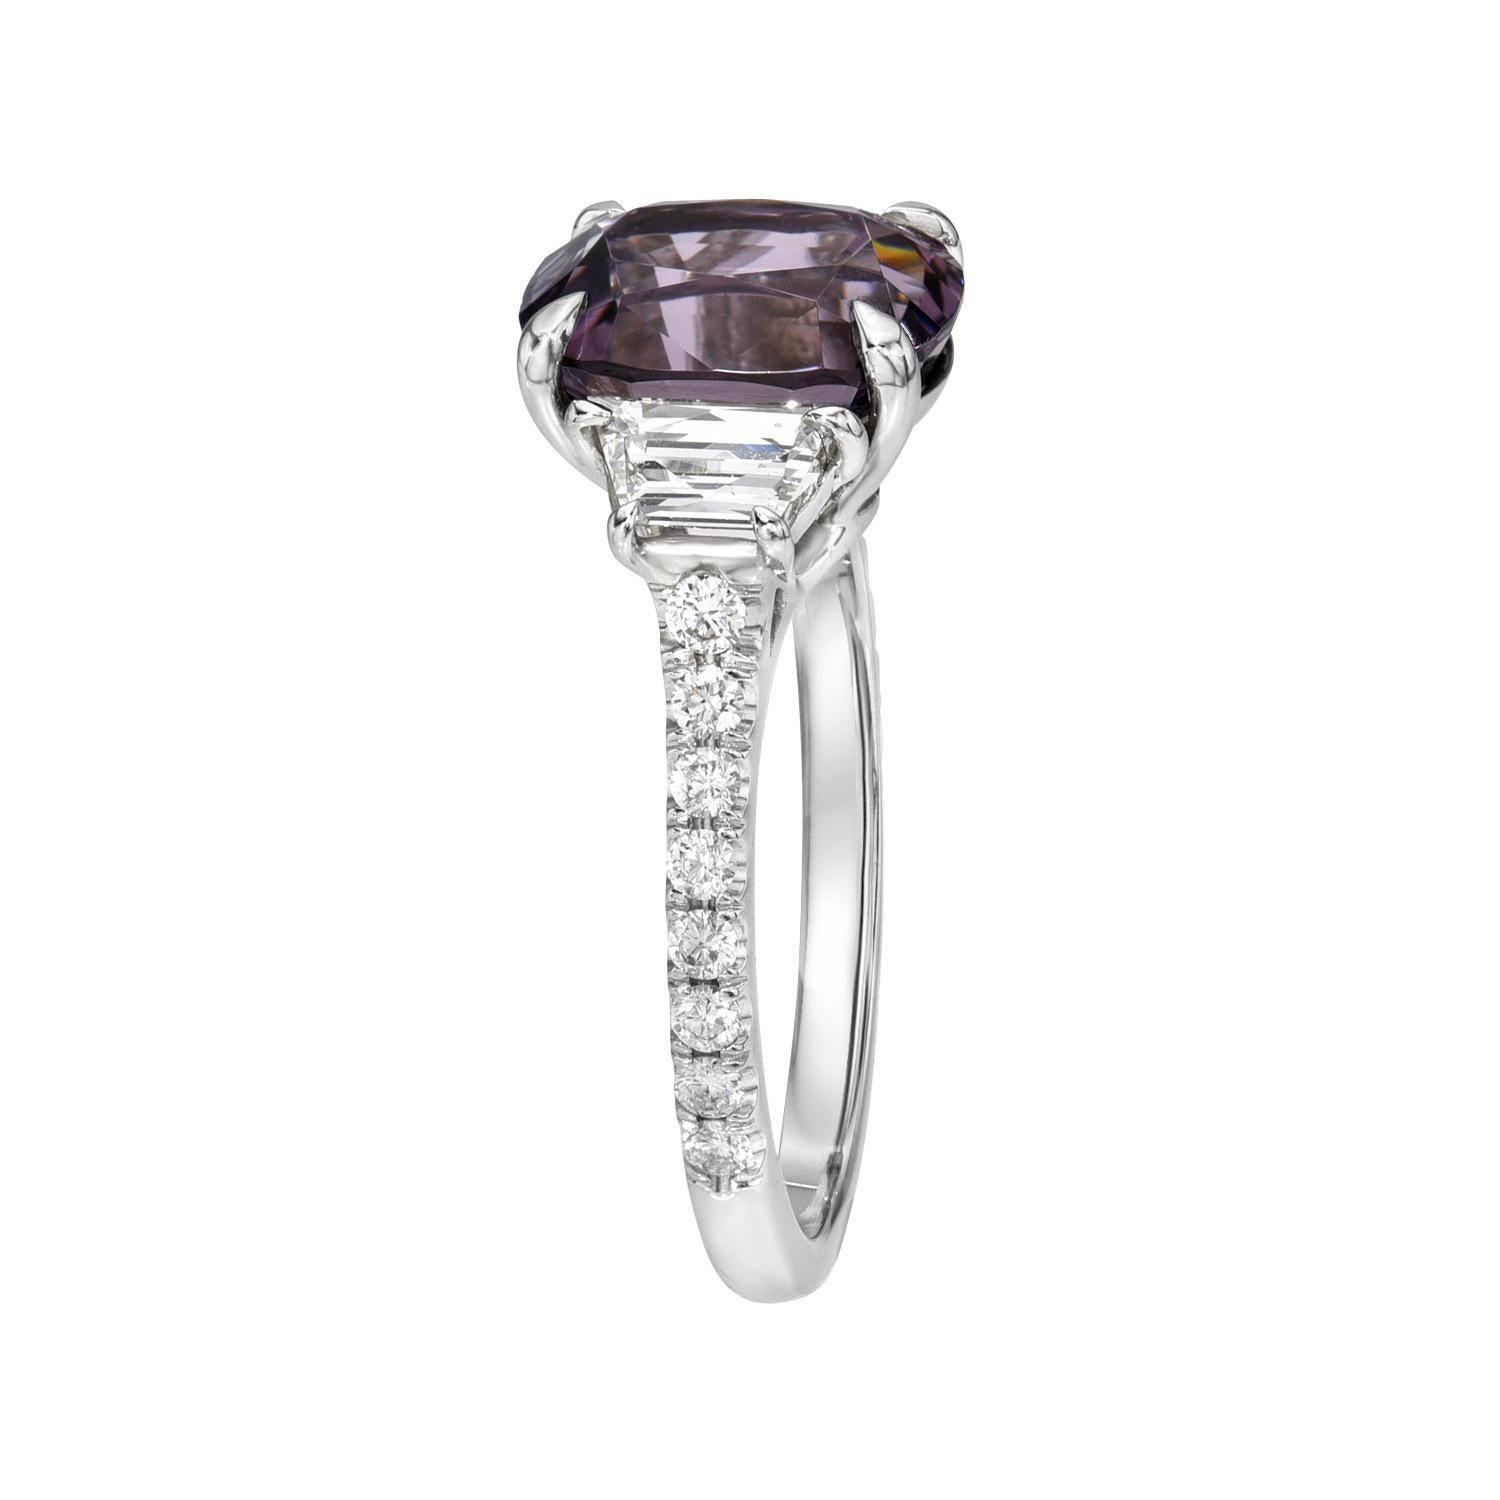 Exclusive 3.98 carat natural Purple Spinel cushion, three stone platinum ring, decorated with a pair of 0.66 carats, H color/VS clarity, trapezoid diamonds, and a total of 0.26 carats round brilliant diamonds.
Size 6. Re-sizing is complimentary upon